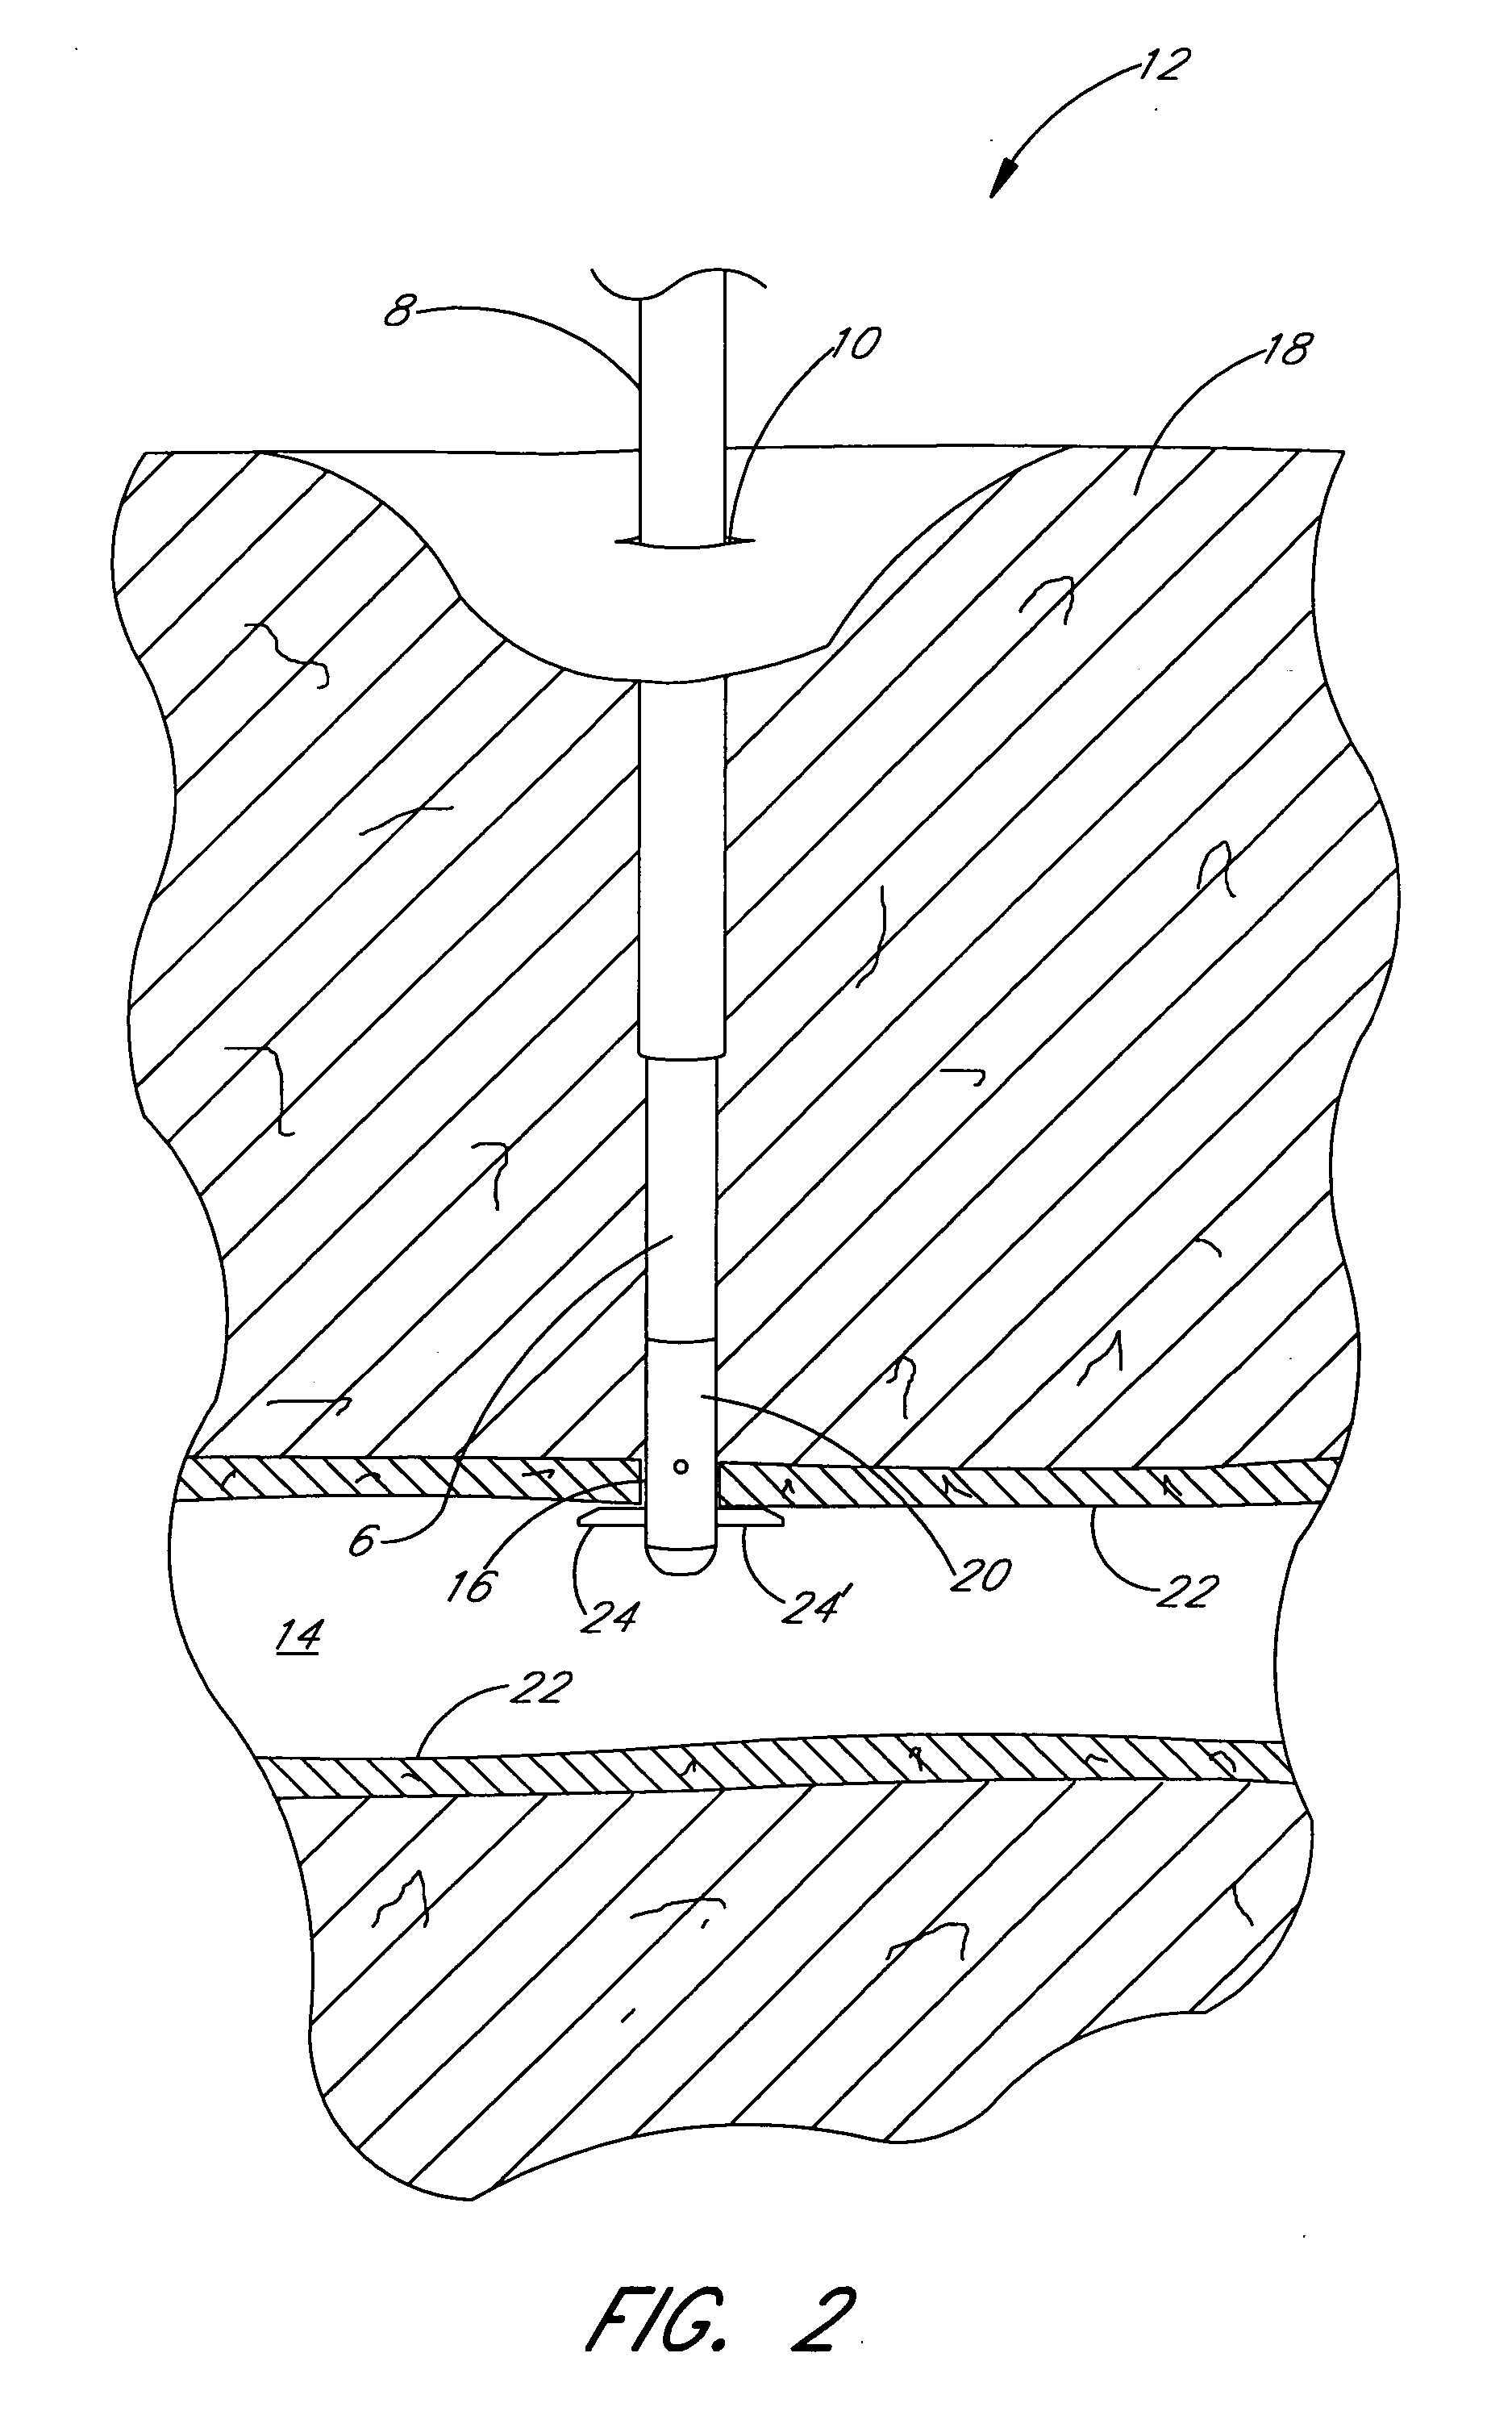 Handle for suturing apparatus